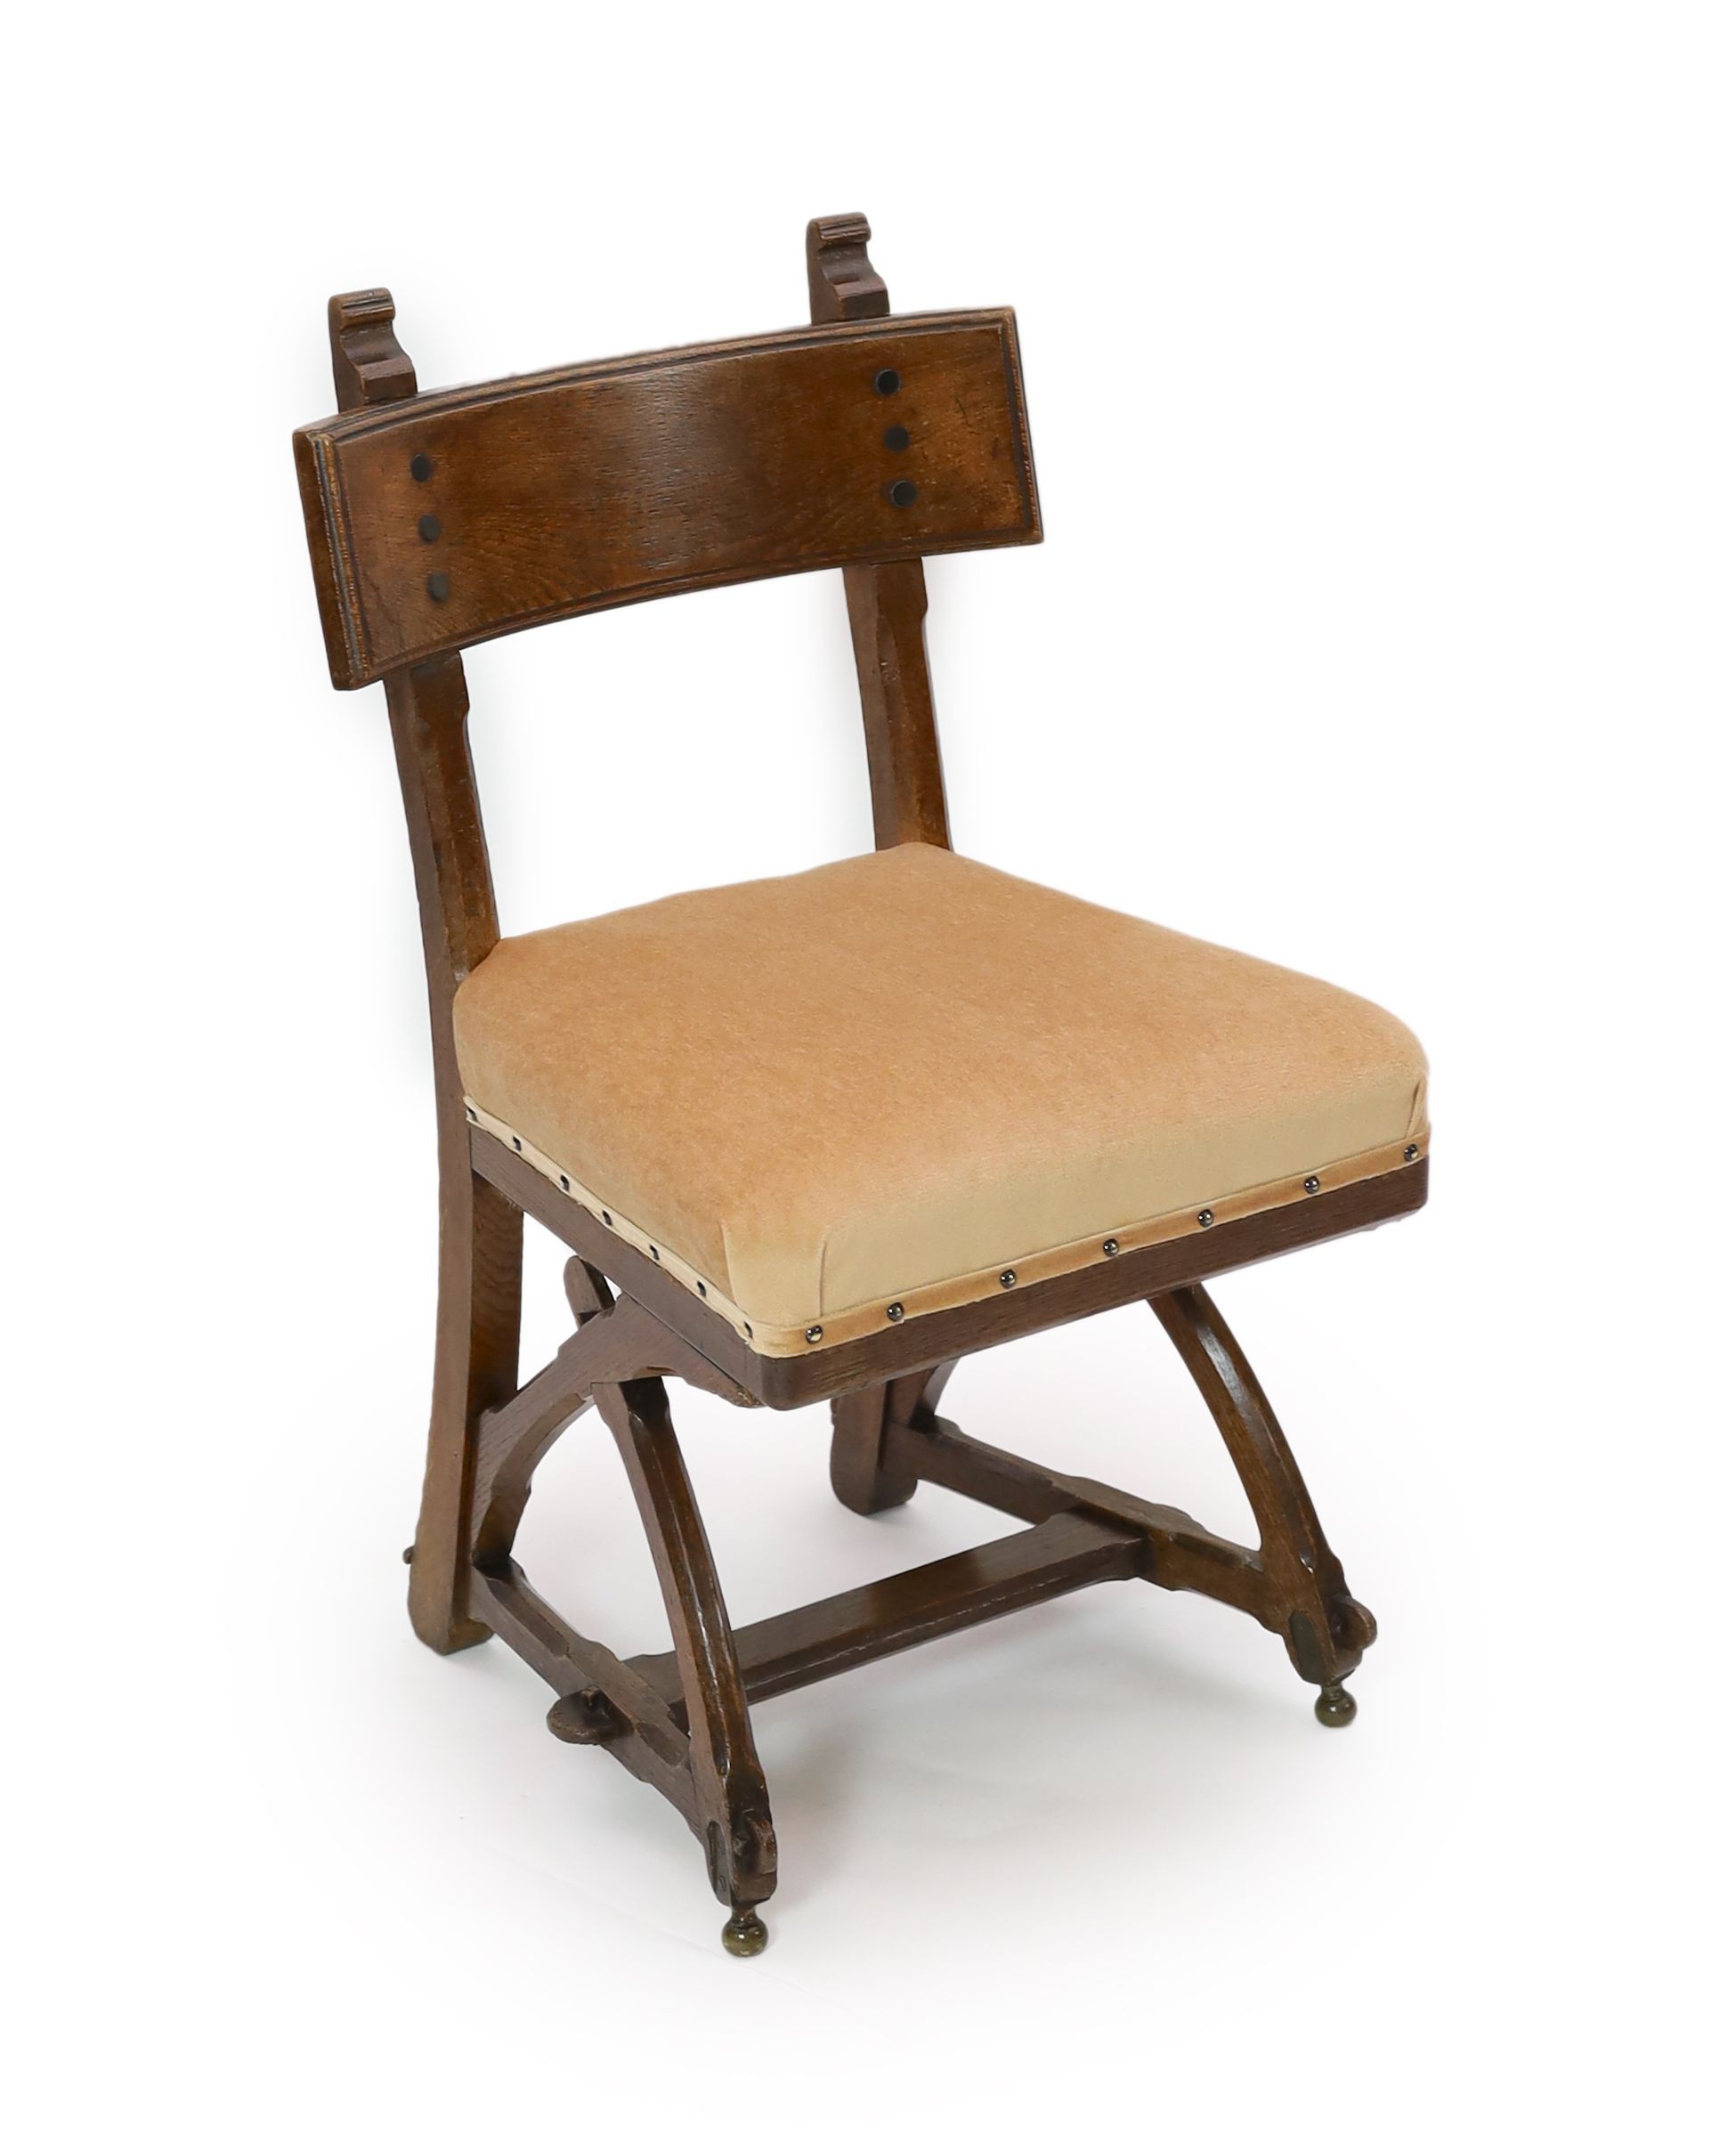 A Victorian reformed gothic oak dining chair designed by Edward Welby Pugin, c.1864, W. 50cm. D. 48cm. H. 84cm.